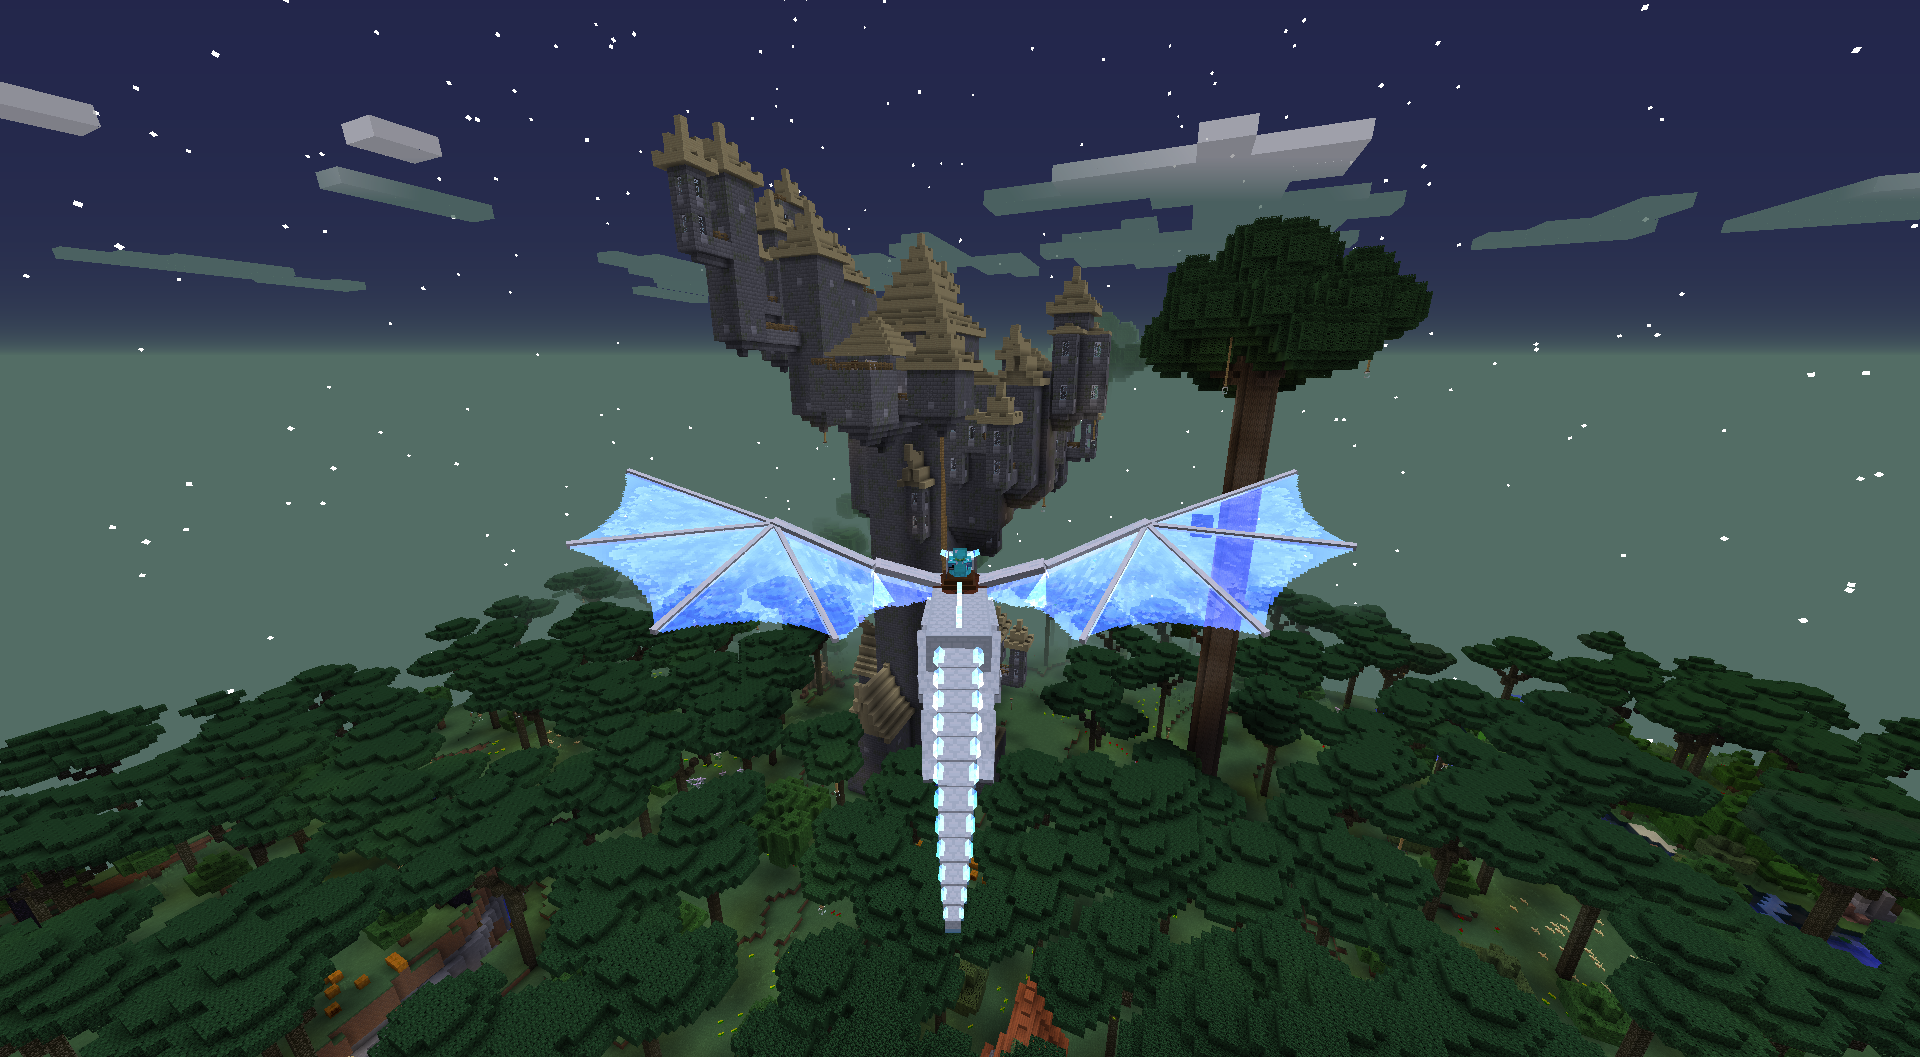 General 1920x1057 Minecraft twilight forest video games PC gaming screen shot